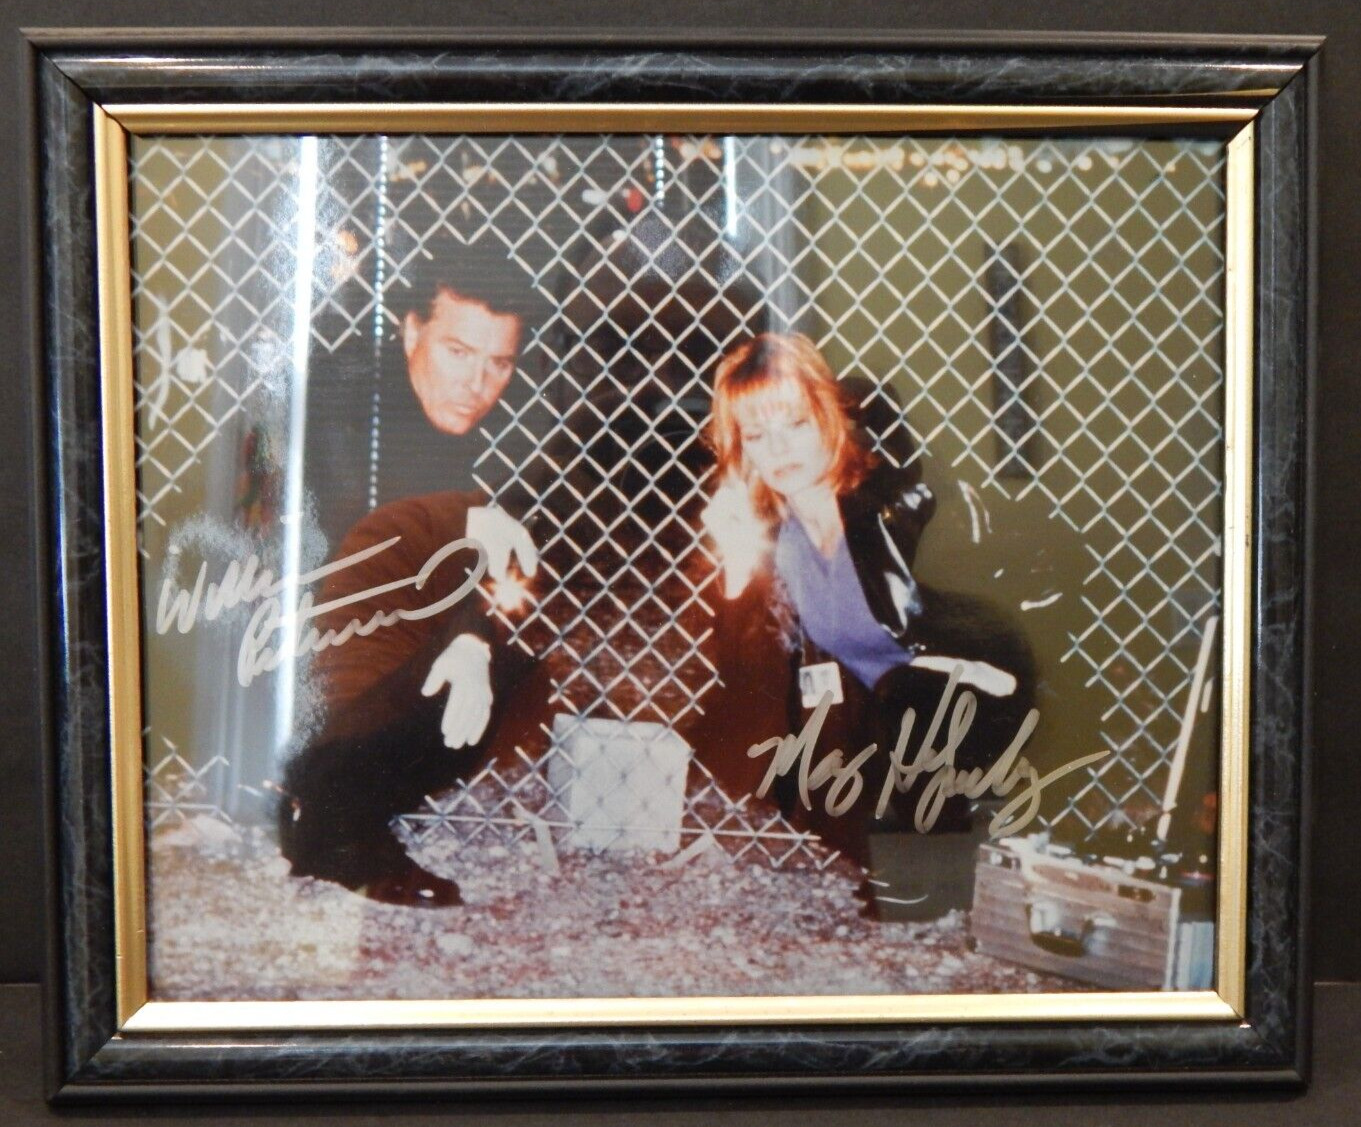 CSI William Peterson & Marg Helgenberger Signed Action 8x10 Photo - Framed w/COA